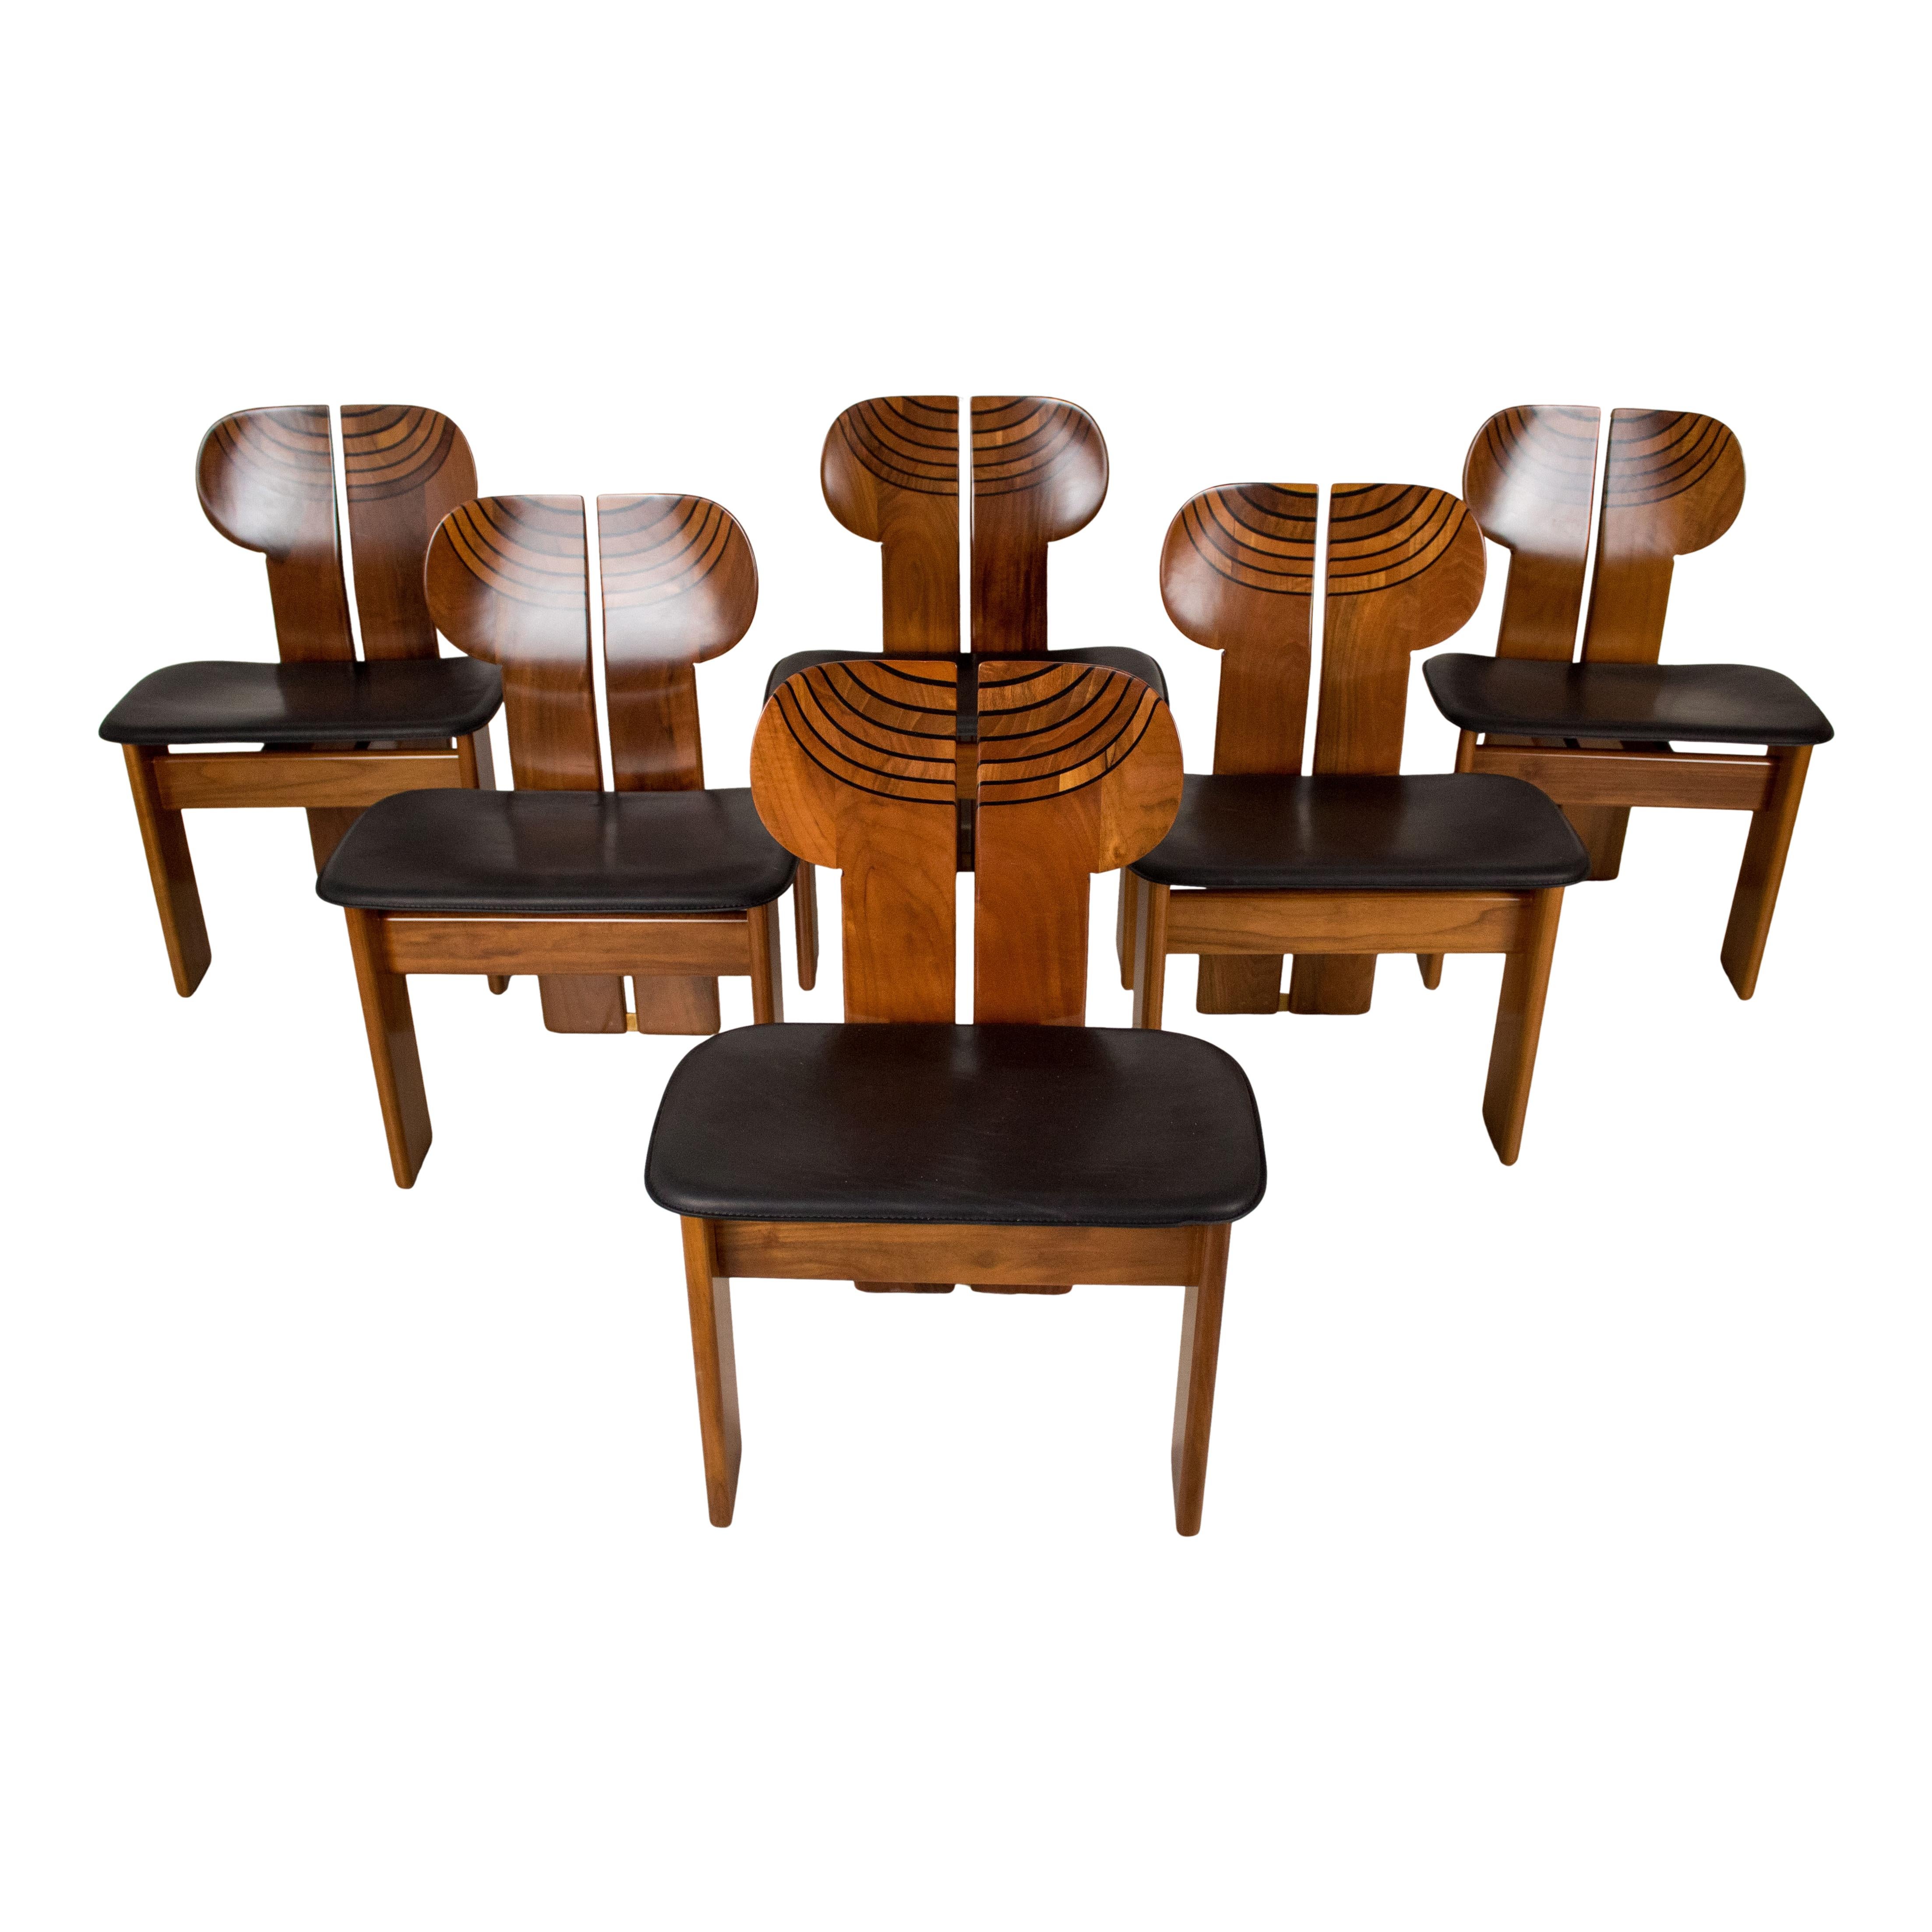 Afra and Tobia Scarpa Walnut Africa Dining Chair for Maxalto, 1976, Set of 6 For Sale 5